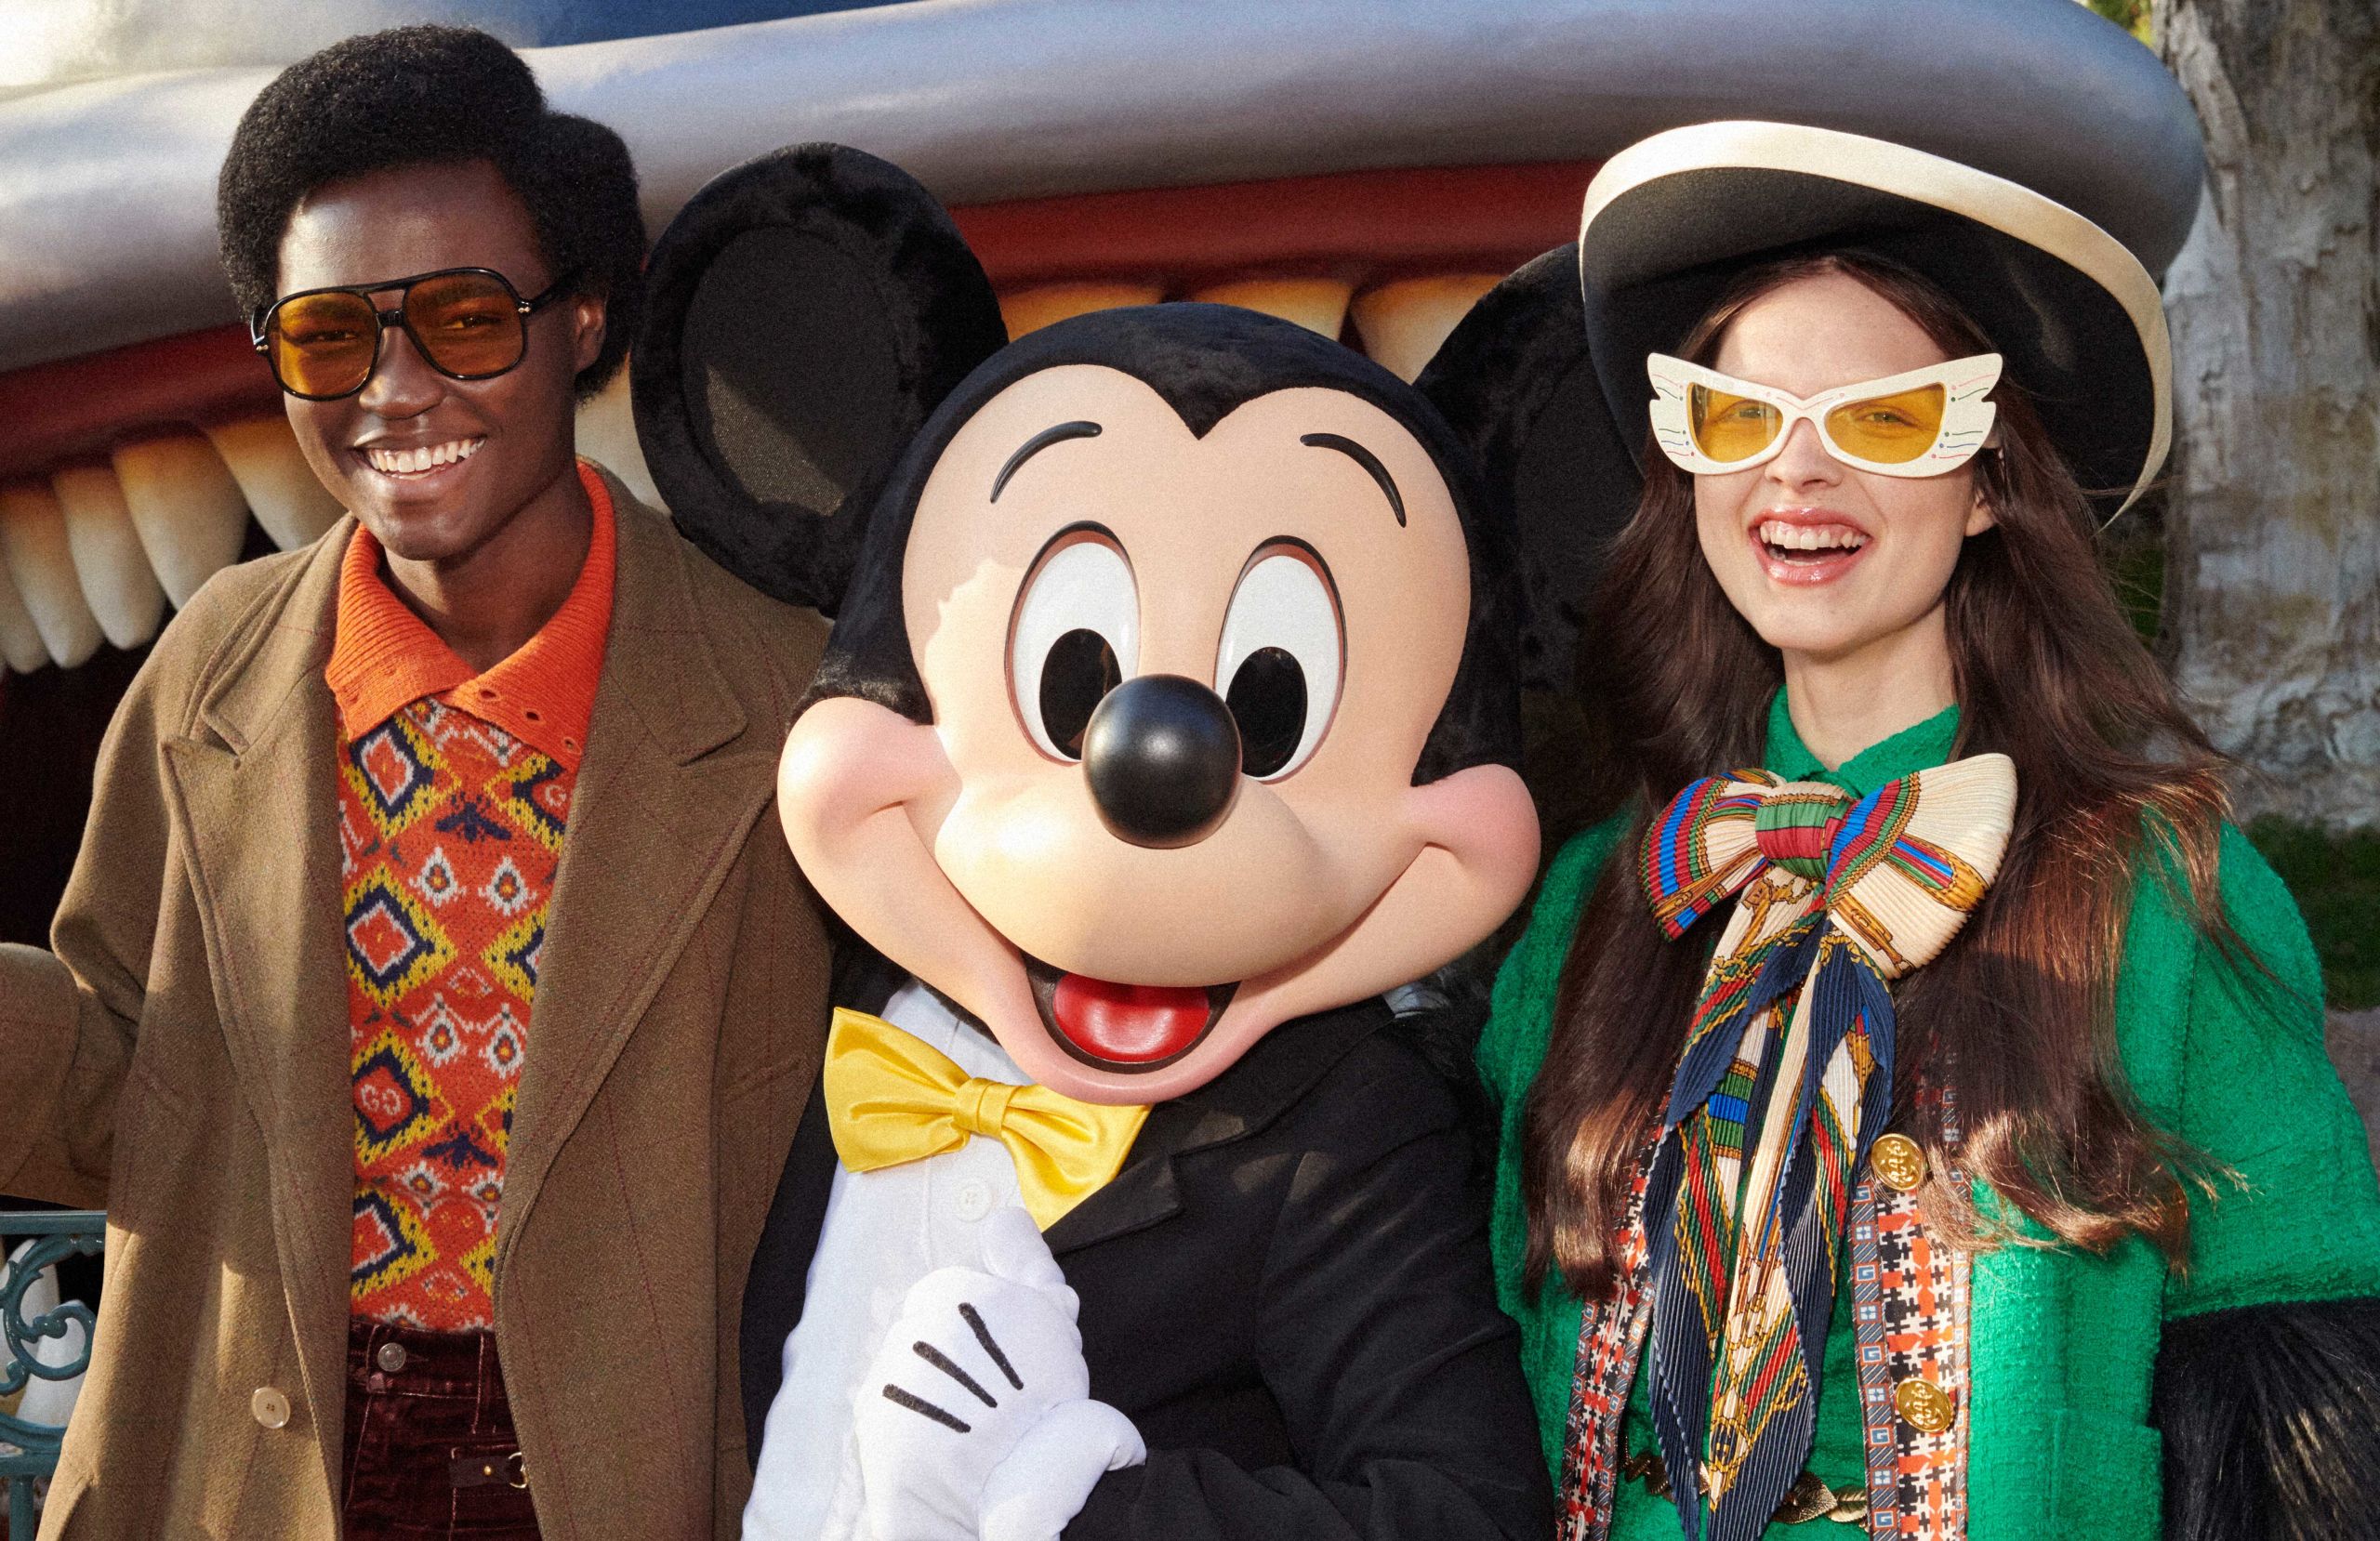 Gucci teams up with Mickey Mouse ahead of the 2020 Lunar New Year